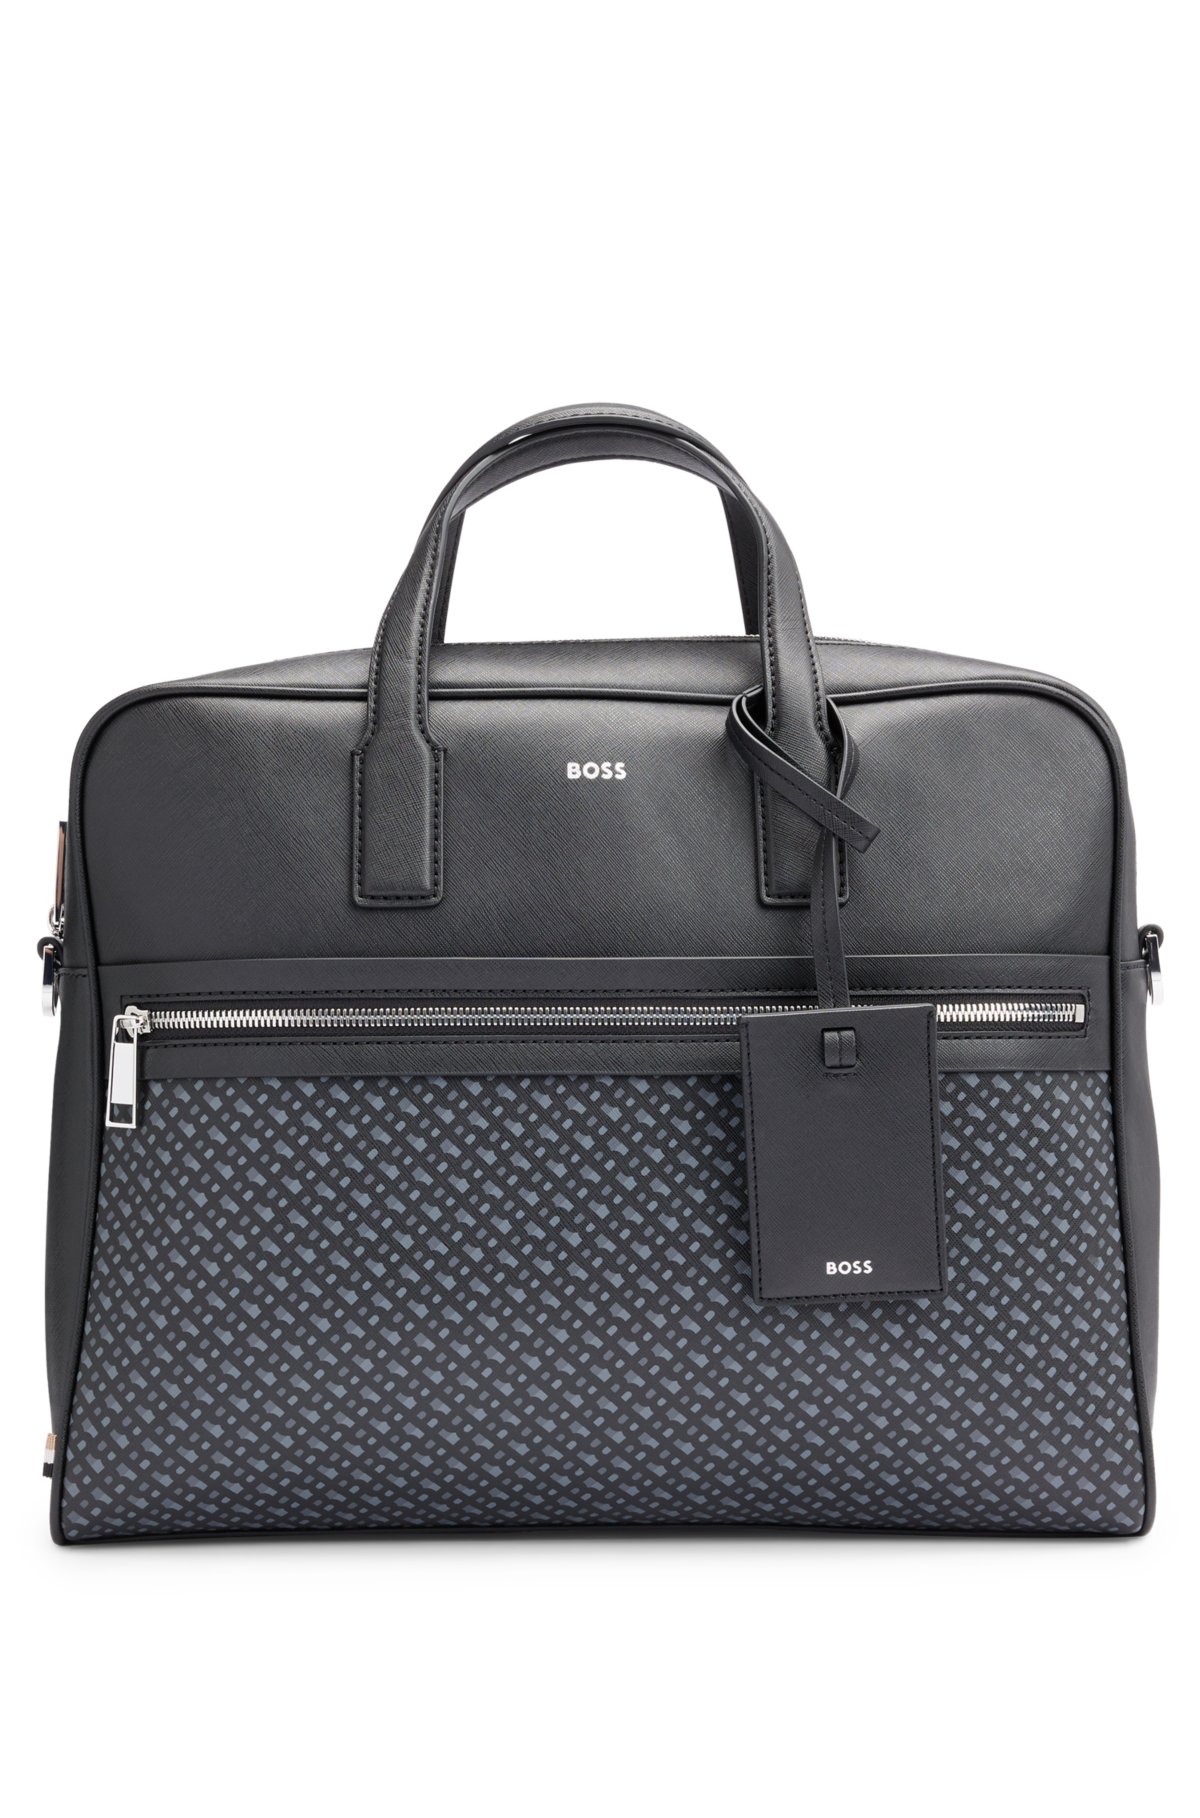 case BOSS monogram - Structured with document detailing